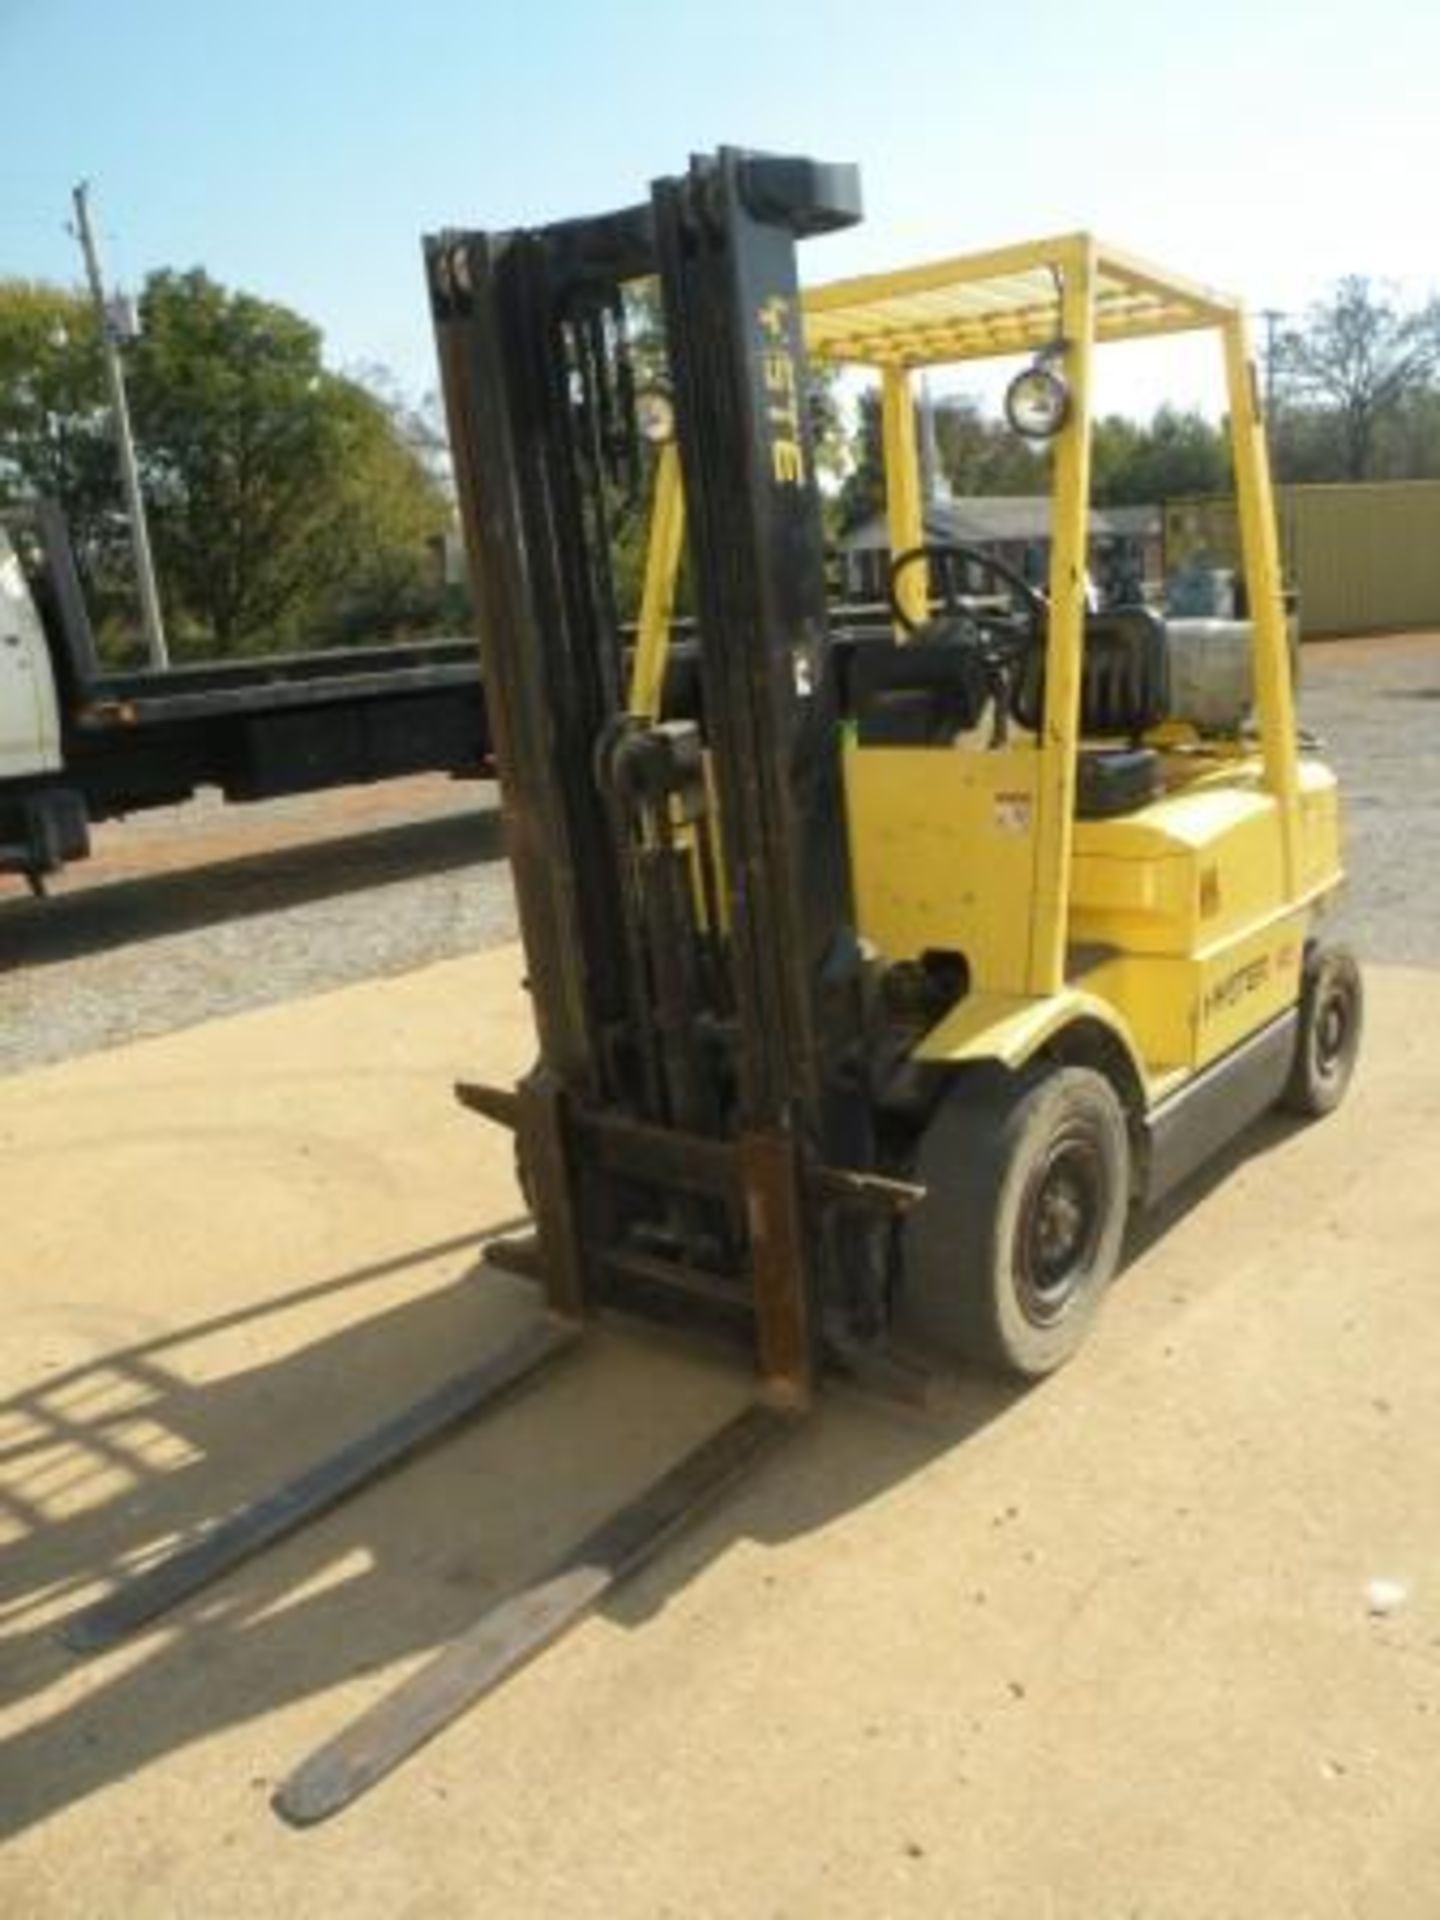 Hyster 45 Cushion Tire Forklift: Uses Propane, Will go on gravel (So. Fulton, TN)